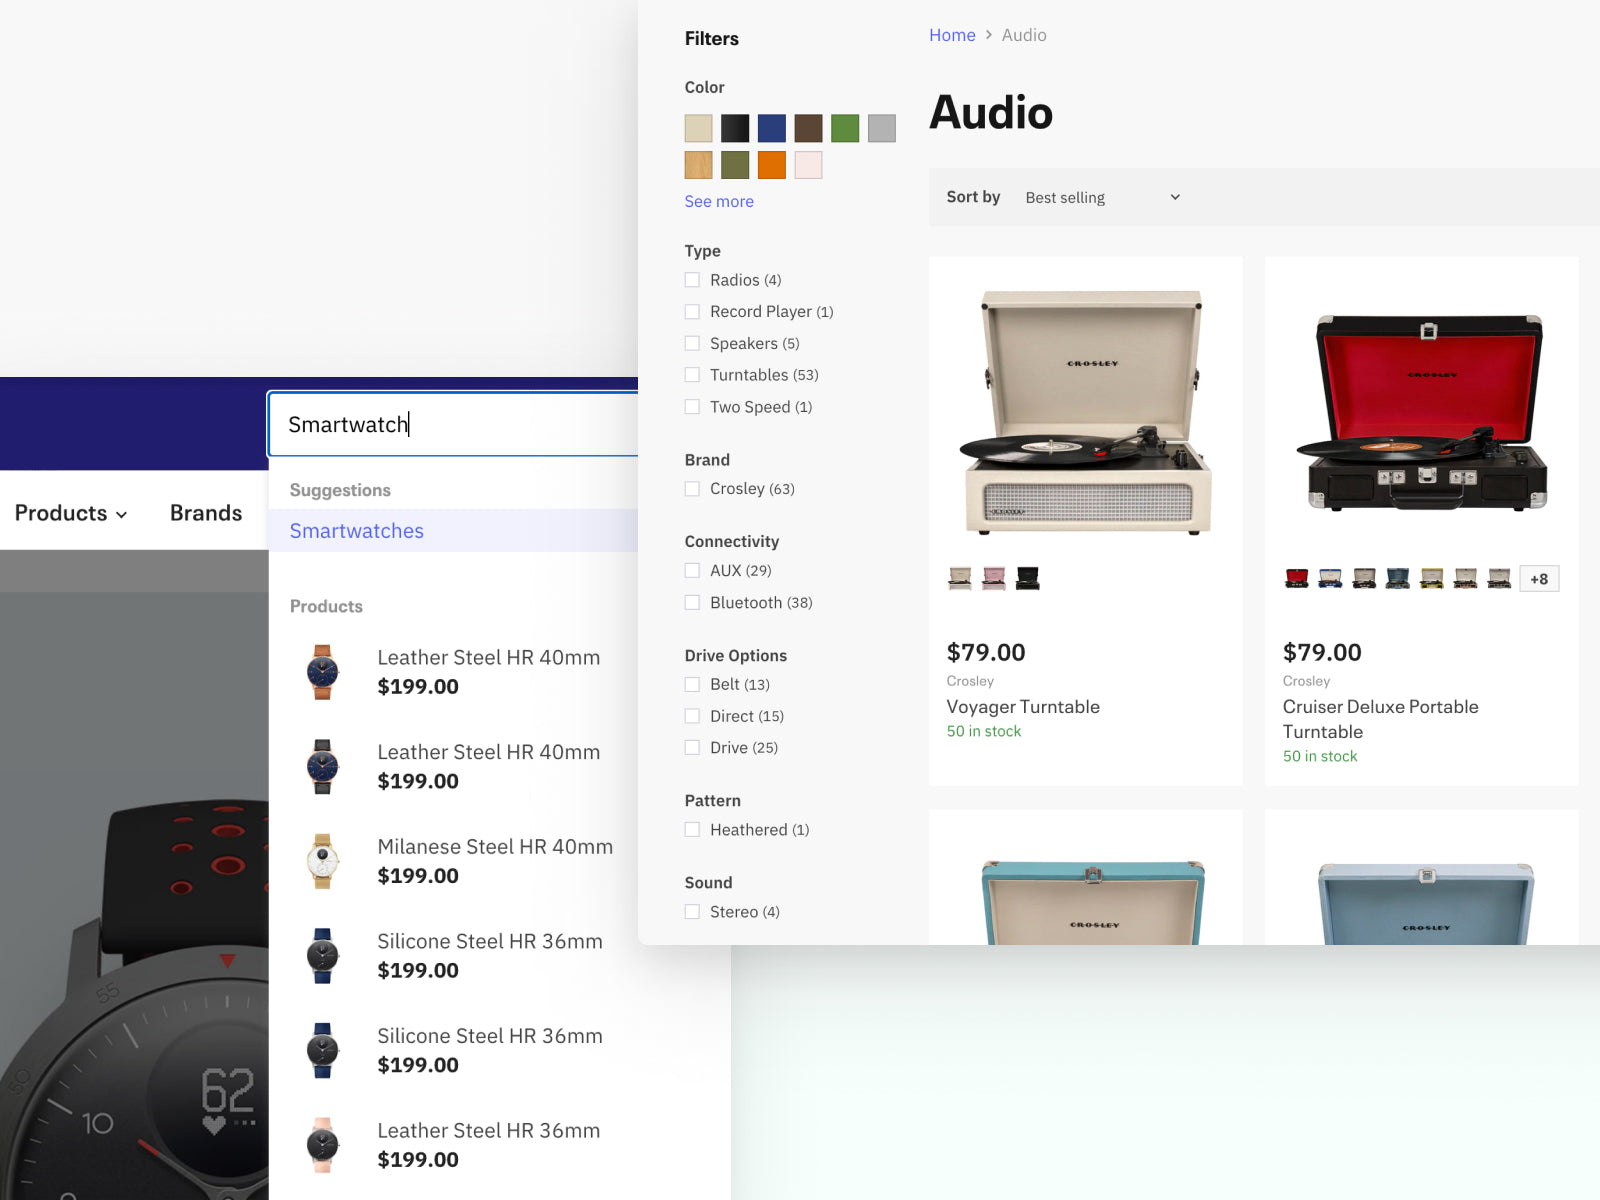 2 screenshots of Superstore Shopify theme by Out of the Sandbox. Left: Header search bar live search of smartwatches. Right: Collection page filters sidebar of color swatches, "Type", "Brand", "Connectivity", and 4 product cards showcasing turntables.